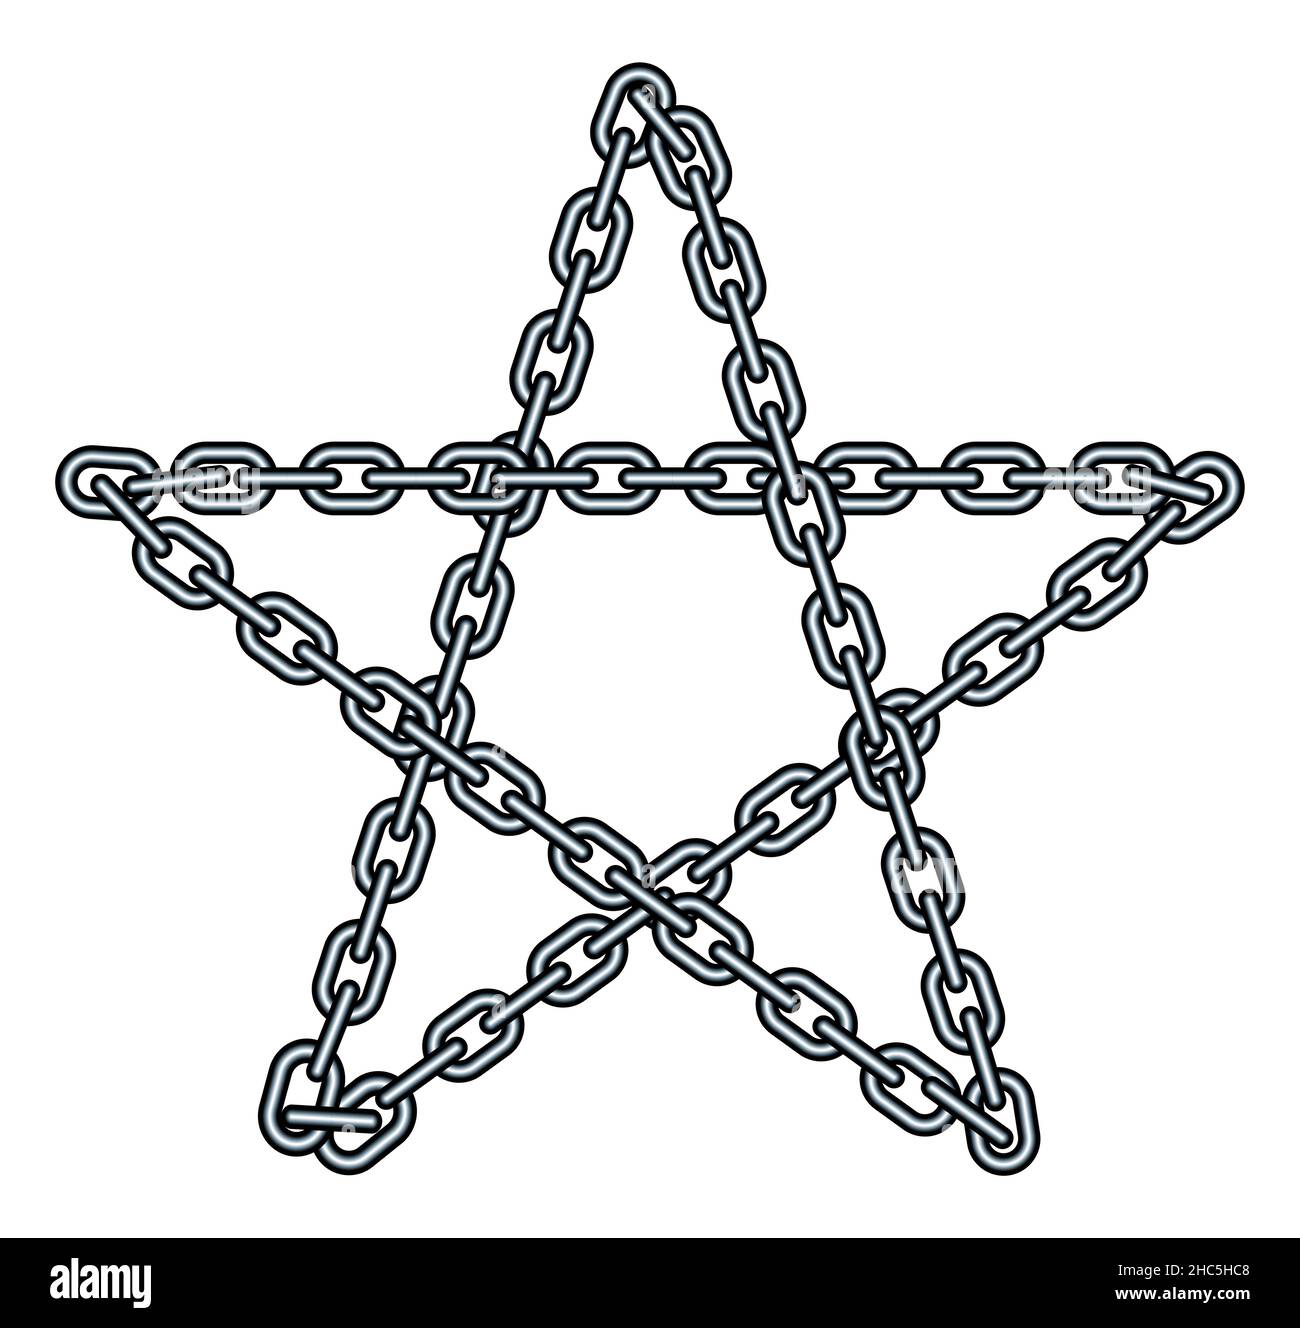 Illustration of the abstract steel chain five-pointed star Stock Vector